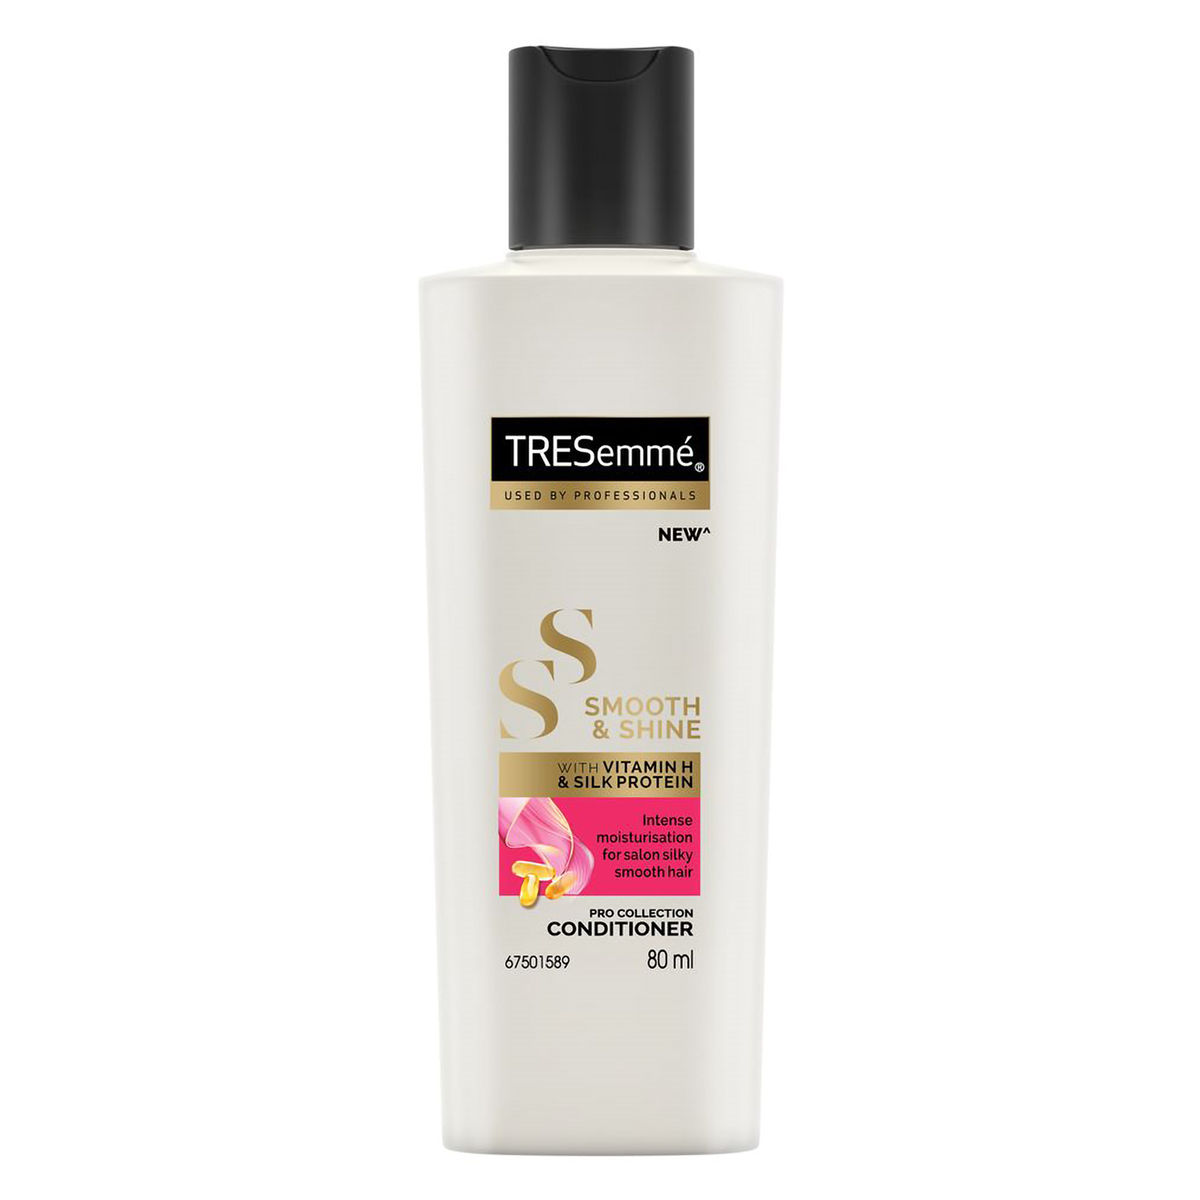 Buy Tresemme Smooth & Shine Conditioner, 80 ml Online